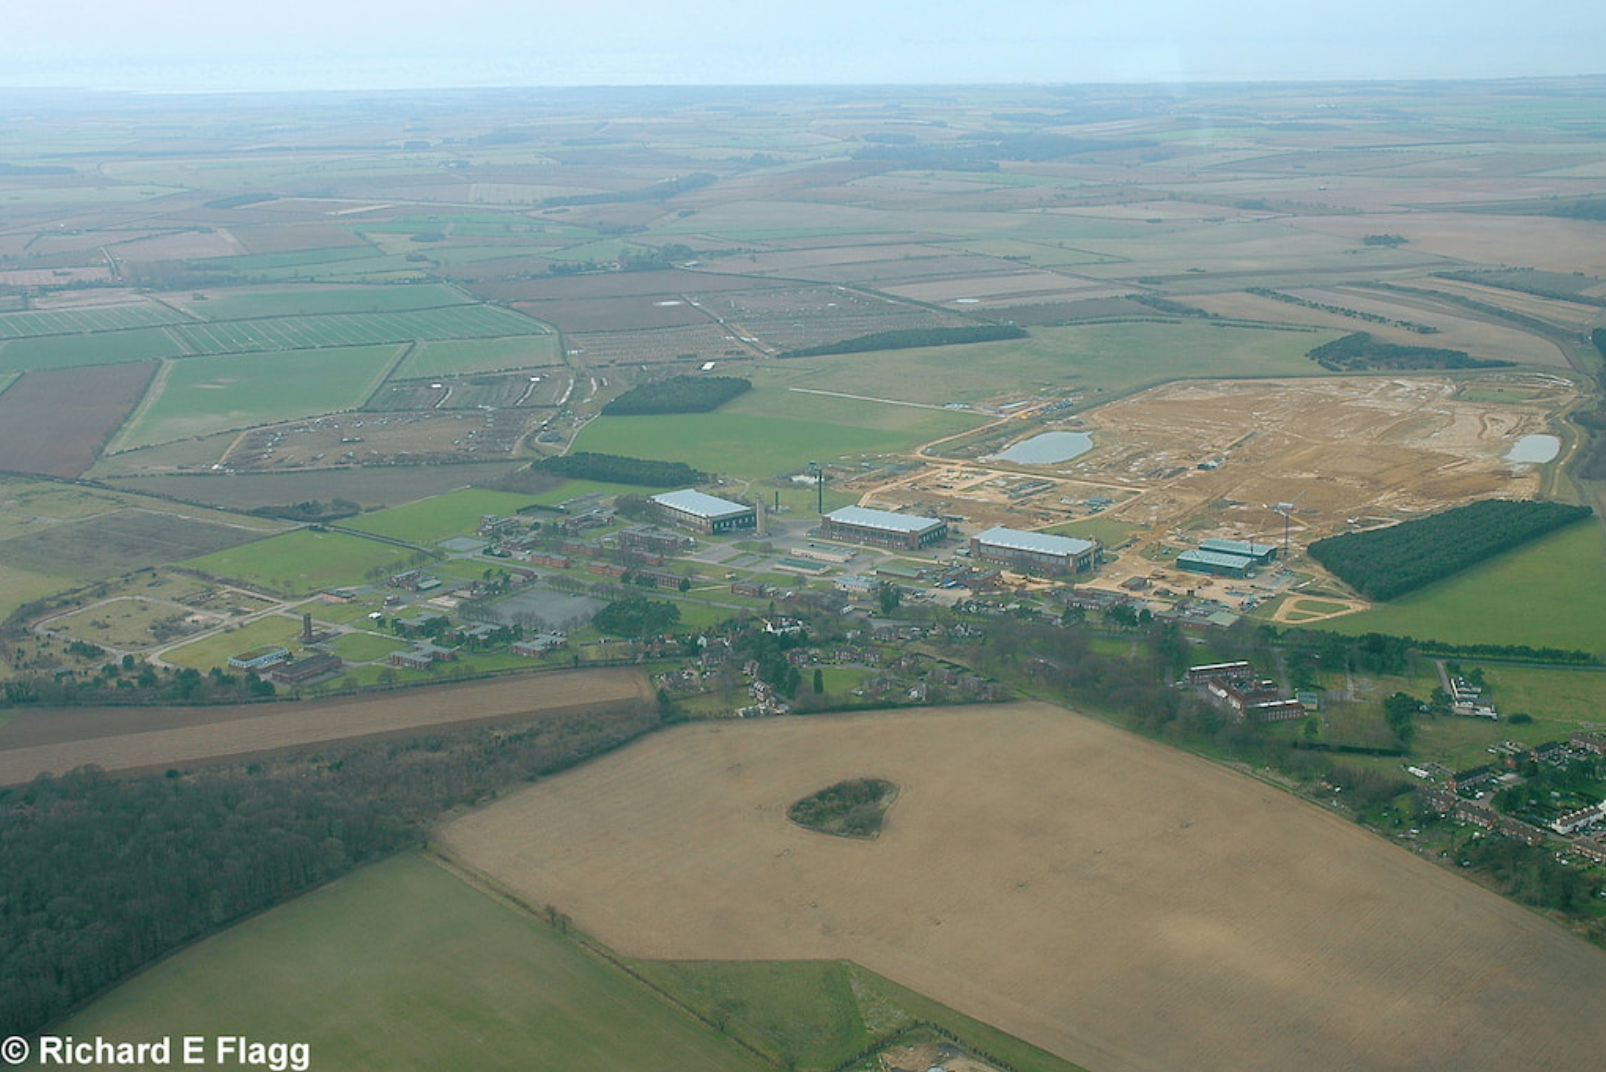 018Aerial View 2 of RAF Bircham Newton Airfield - 15 March 2009.png